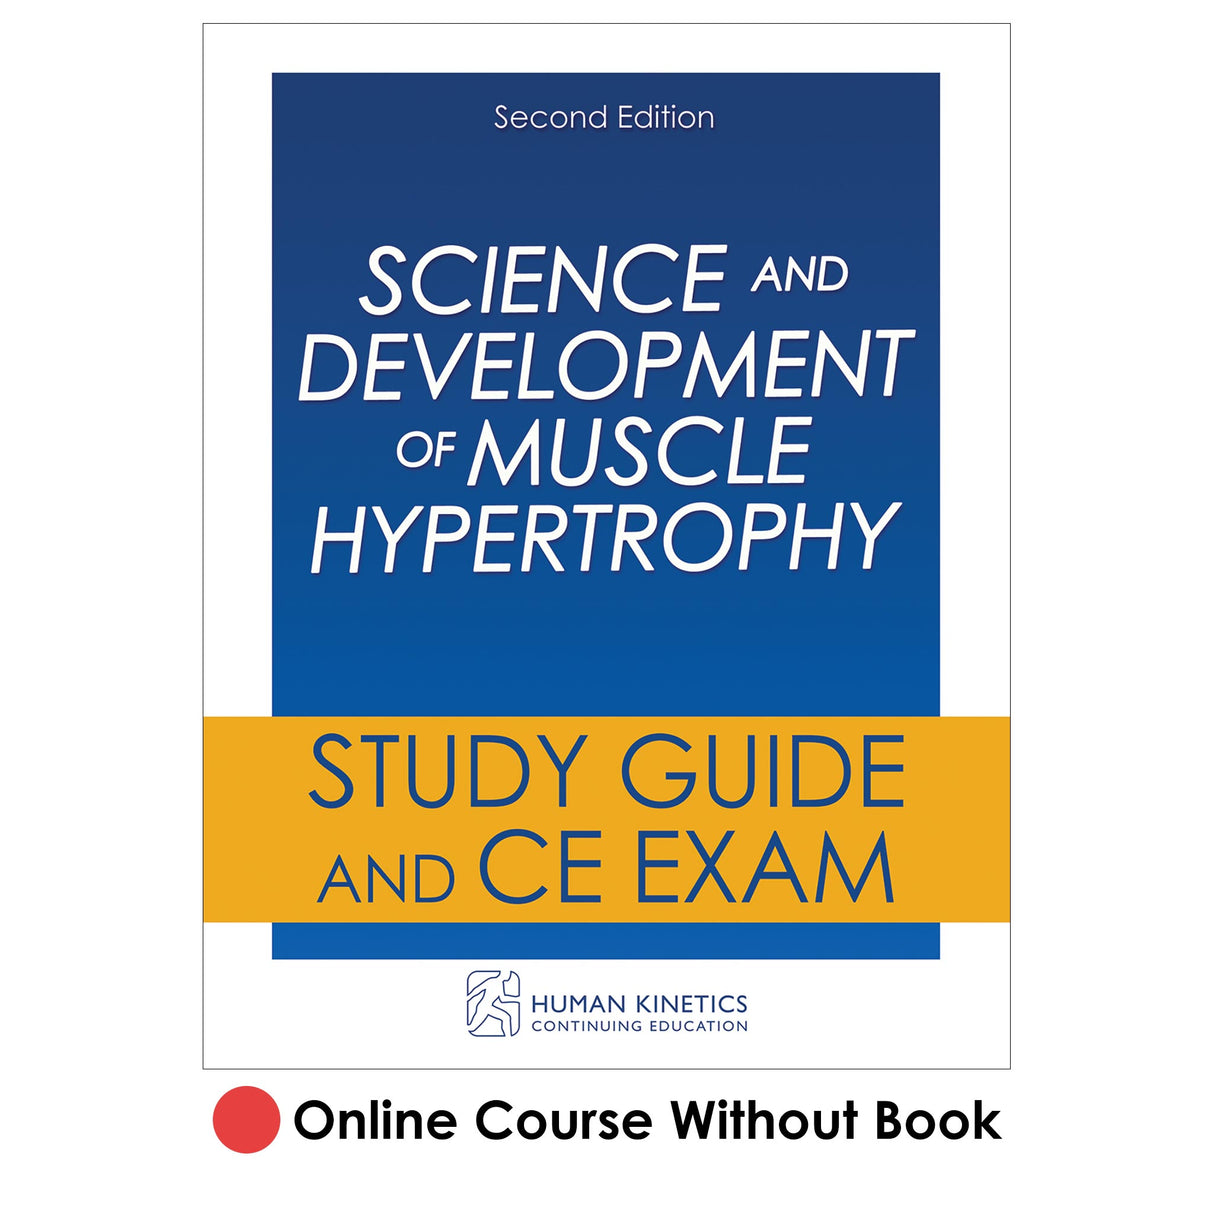 Science and Development of Muscle Hypertrophy 2nd Edition Online CE Course Without Book